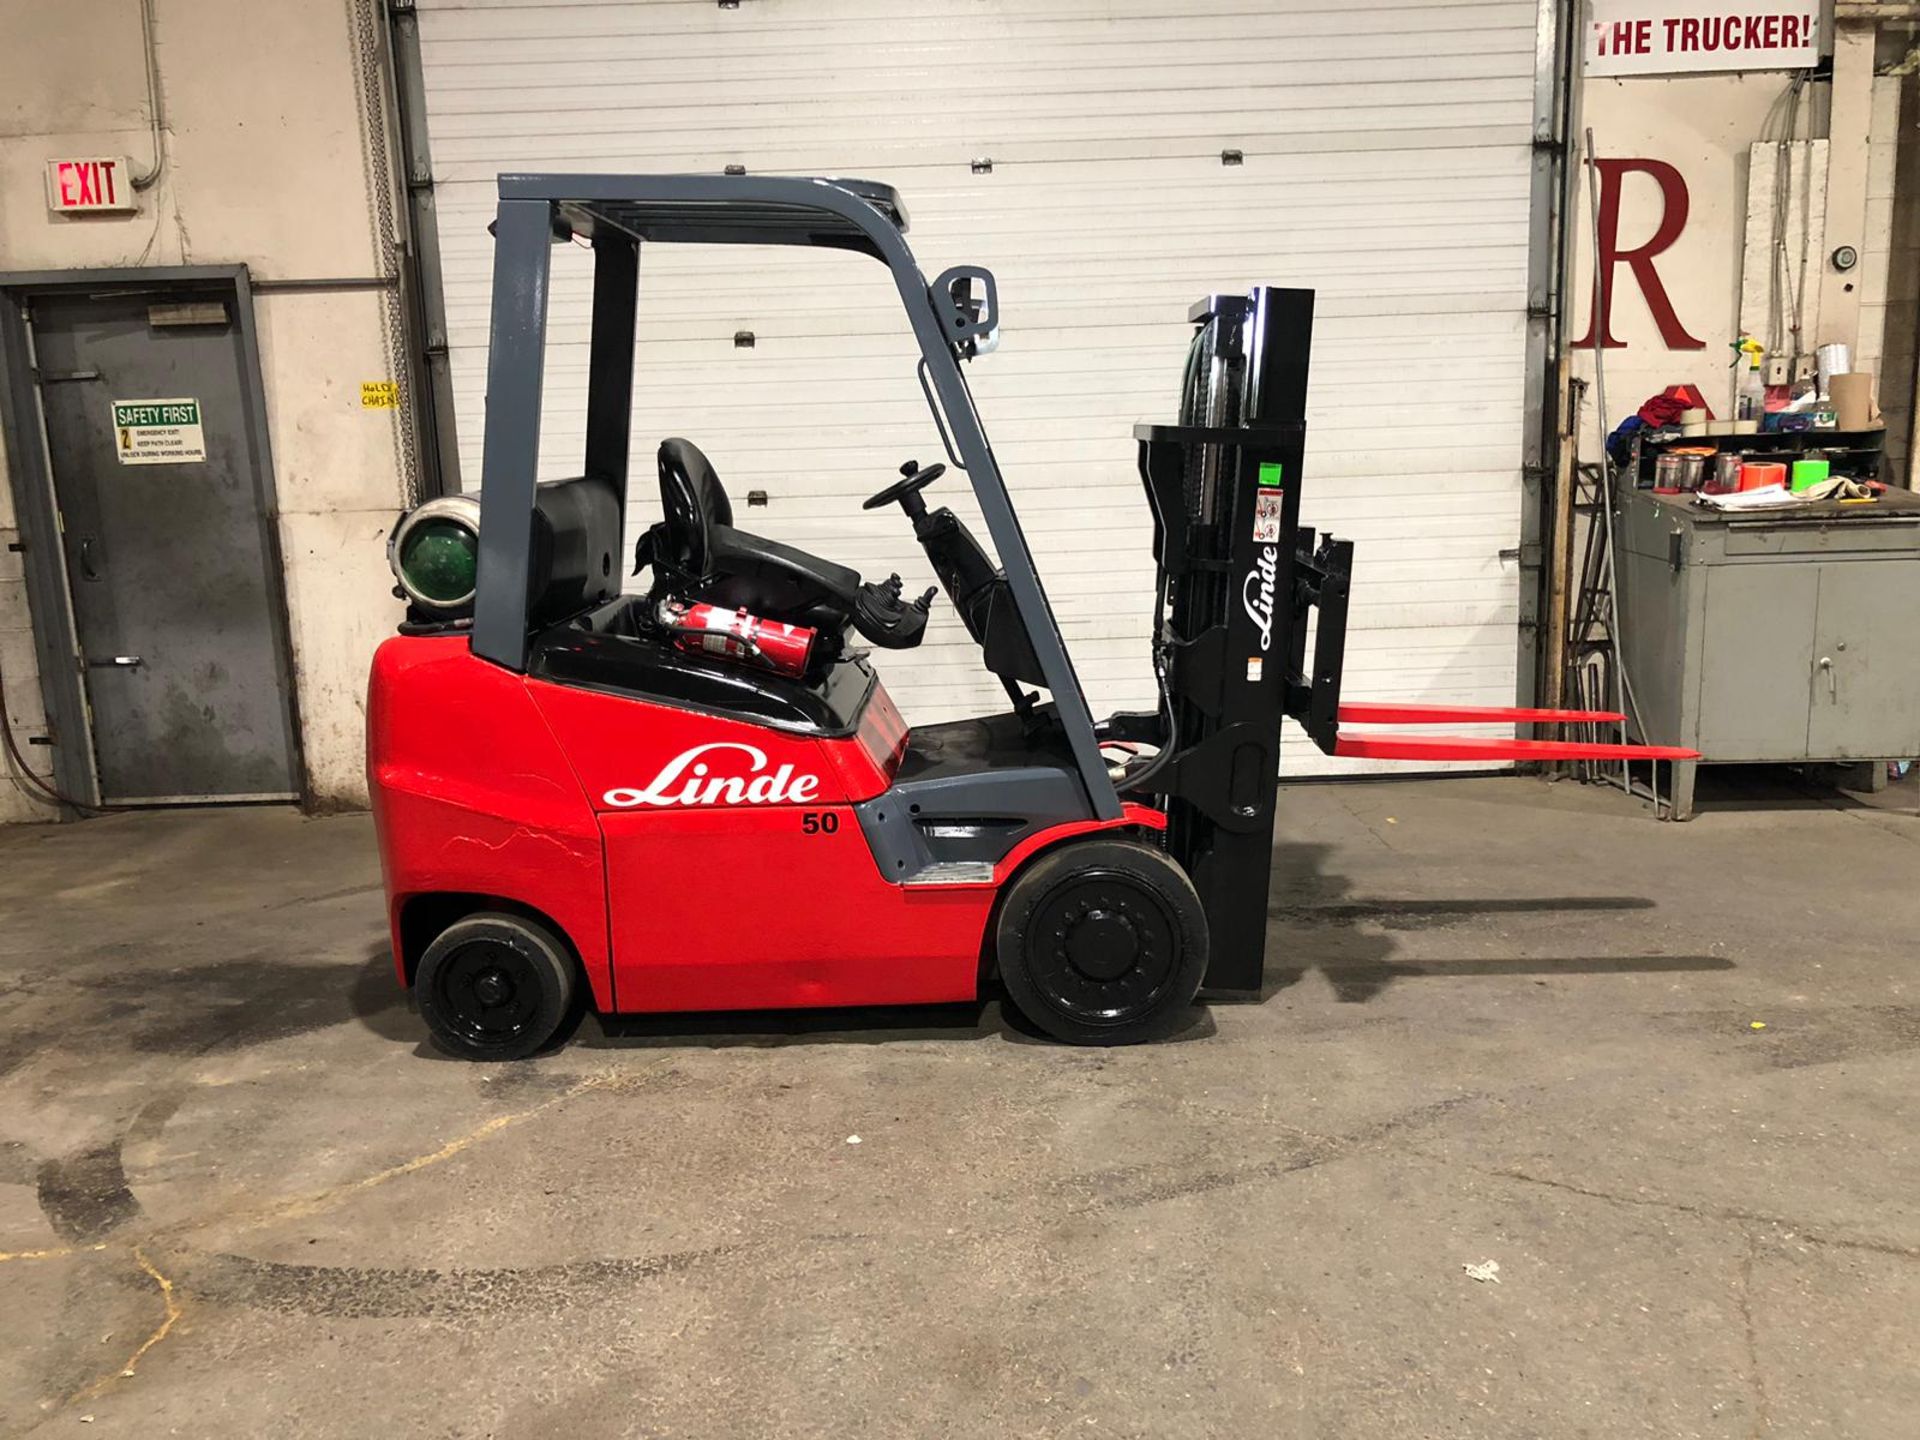 2013 Linde 5000lbs Capacity LPG (Propane) INDOOR Forklift with sideshift (no propane tank included)